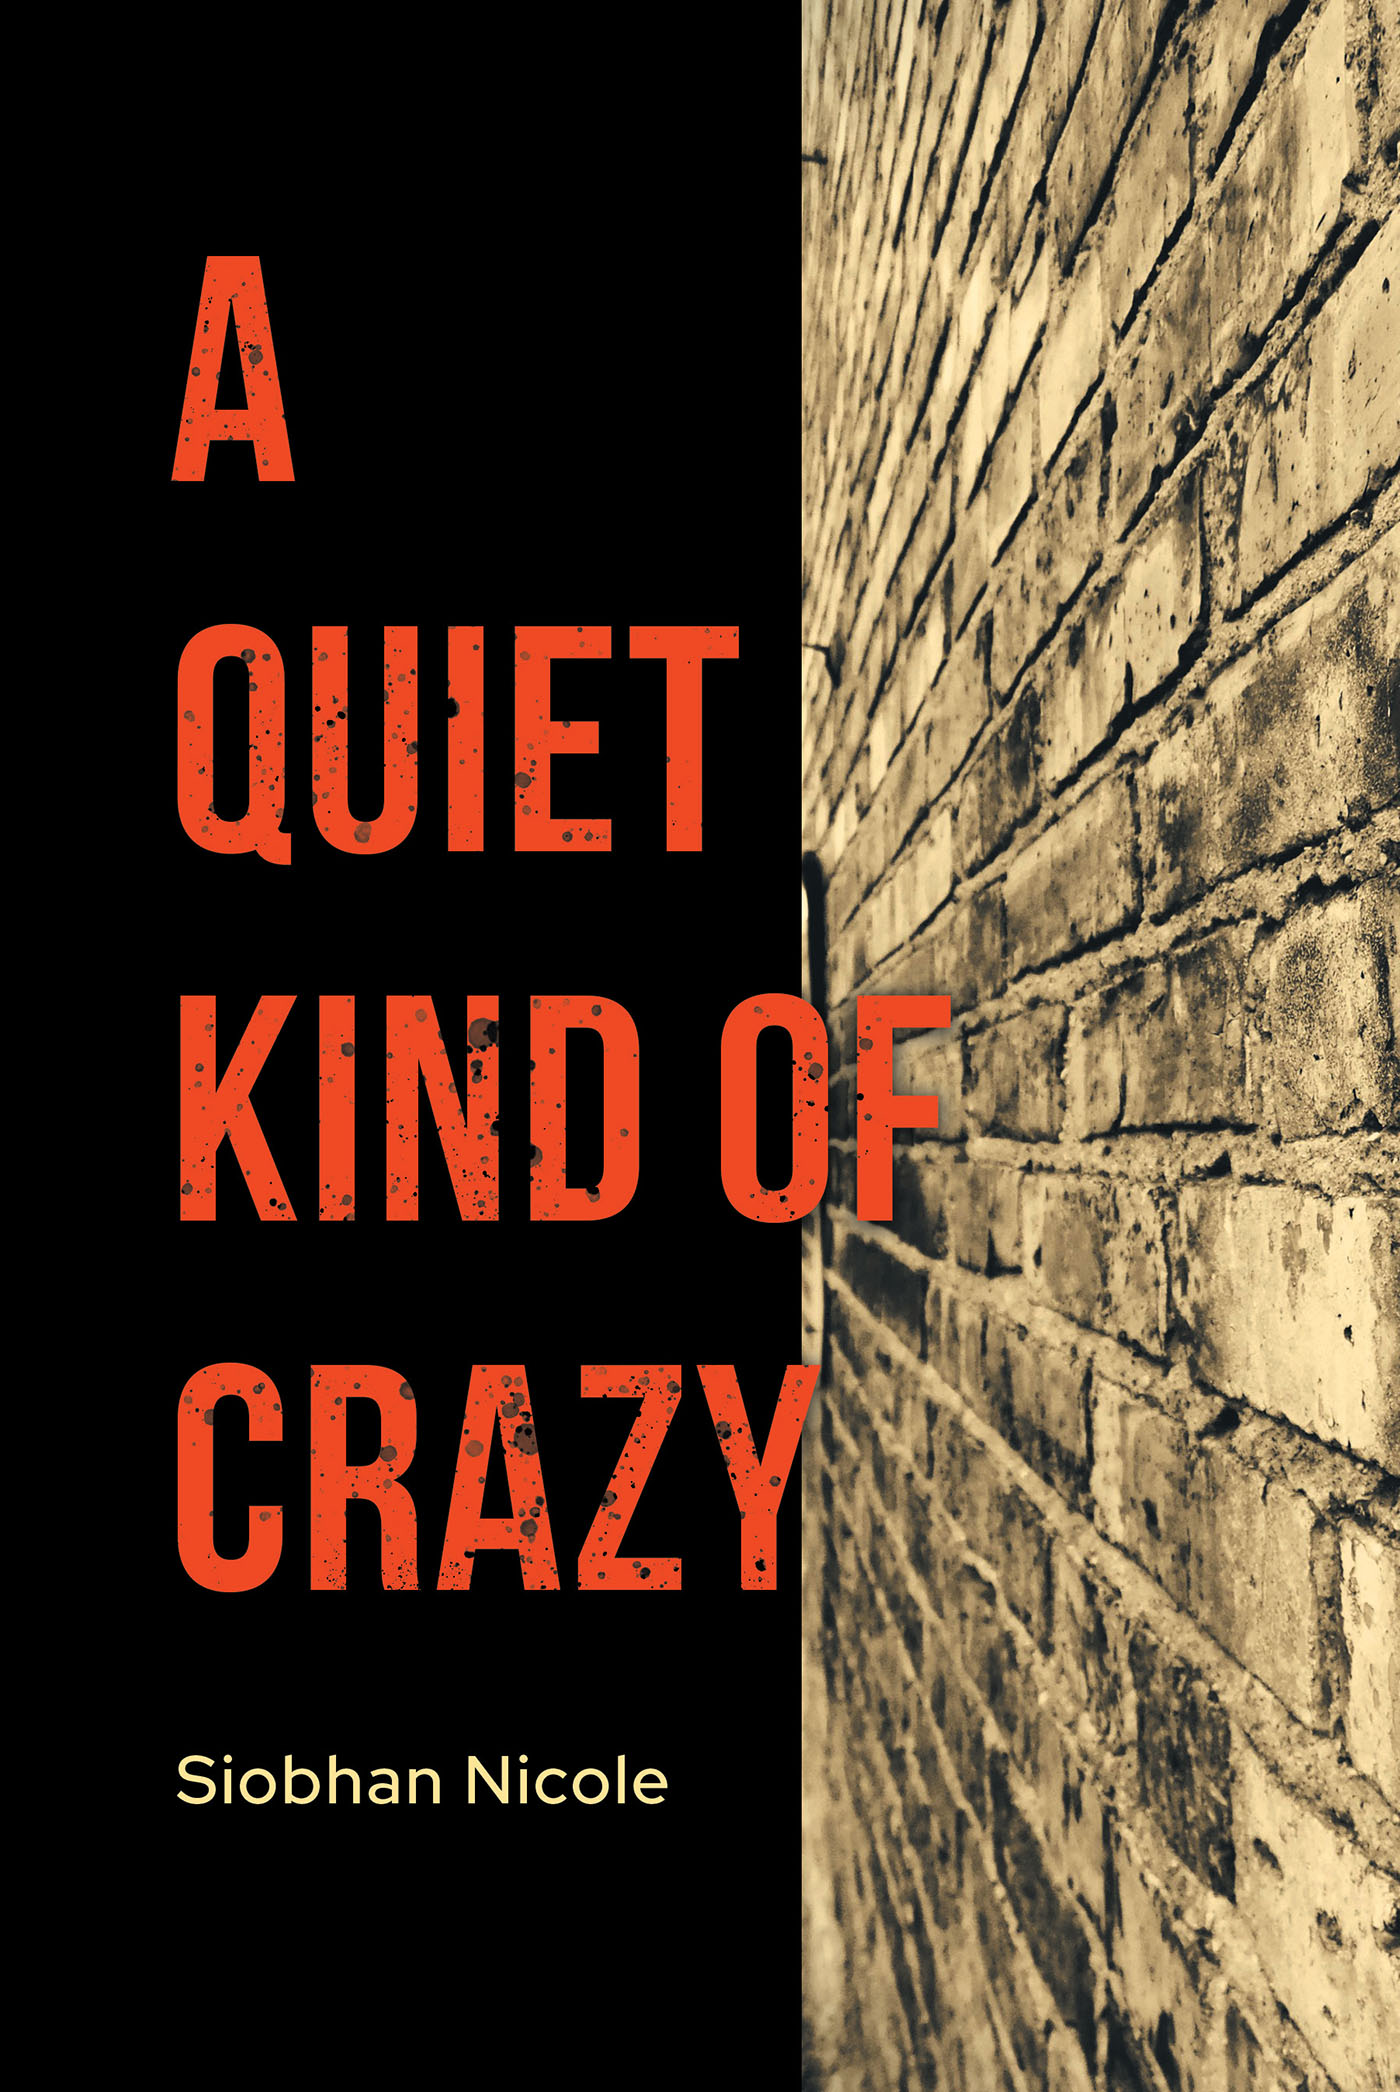 Author Siobhan Nicole’s New Book, "A Quiet Kind of Crazy," is a Thought-Provoking Story Exploring the Anguish That Those Who Hide Their True Selves Are Forced to Endure